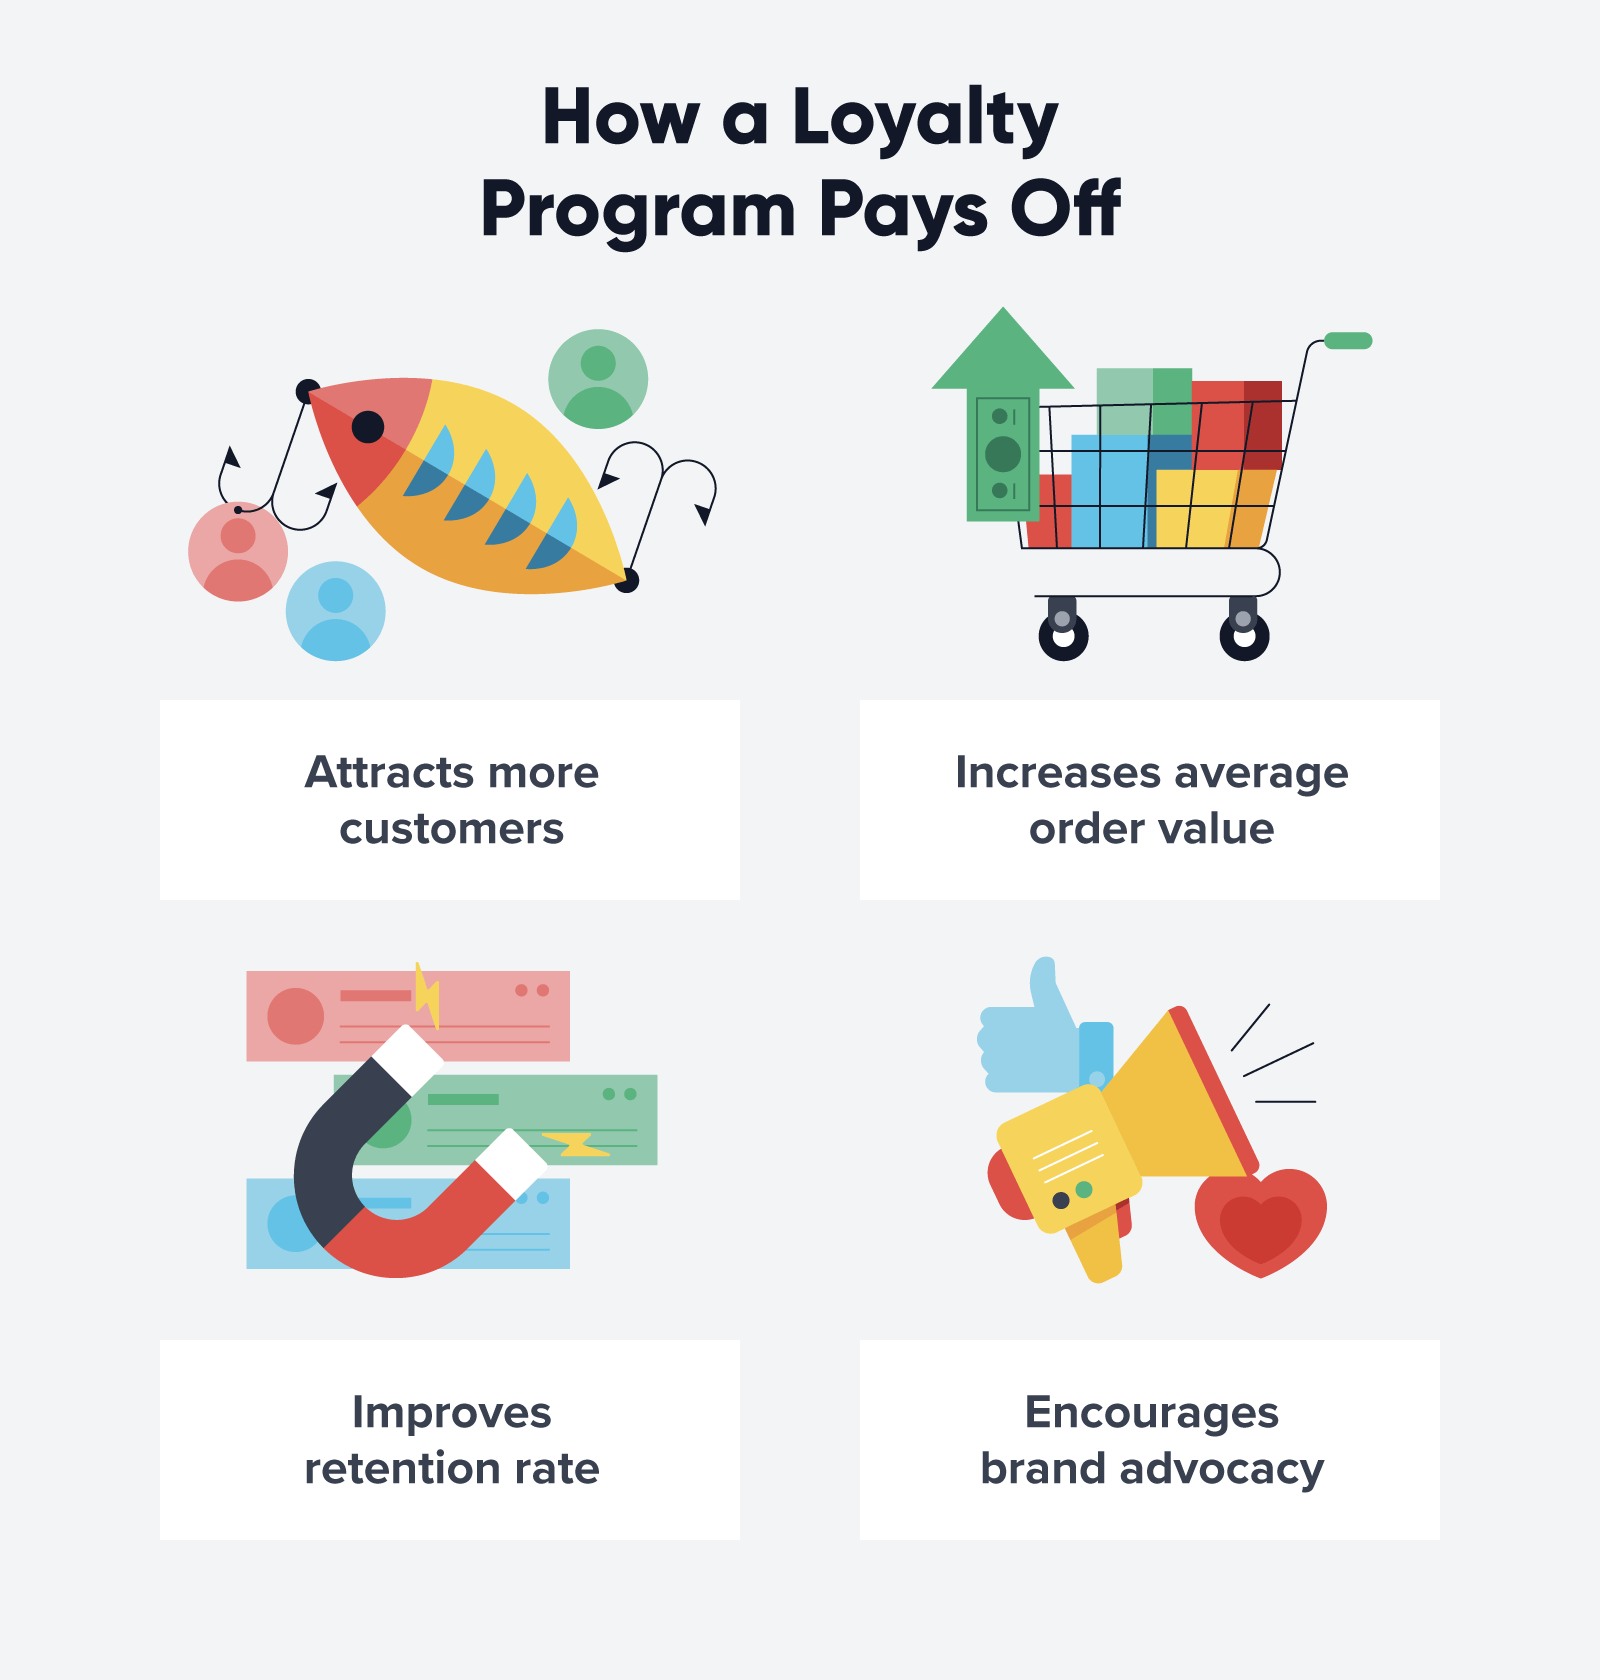 How a loyalty program pays off